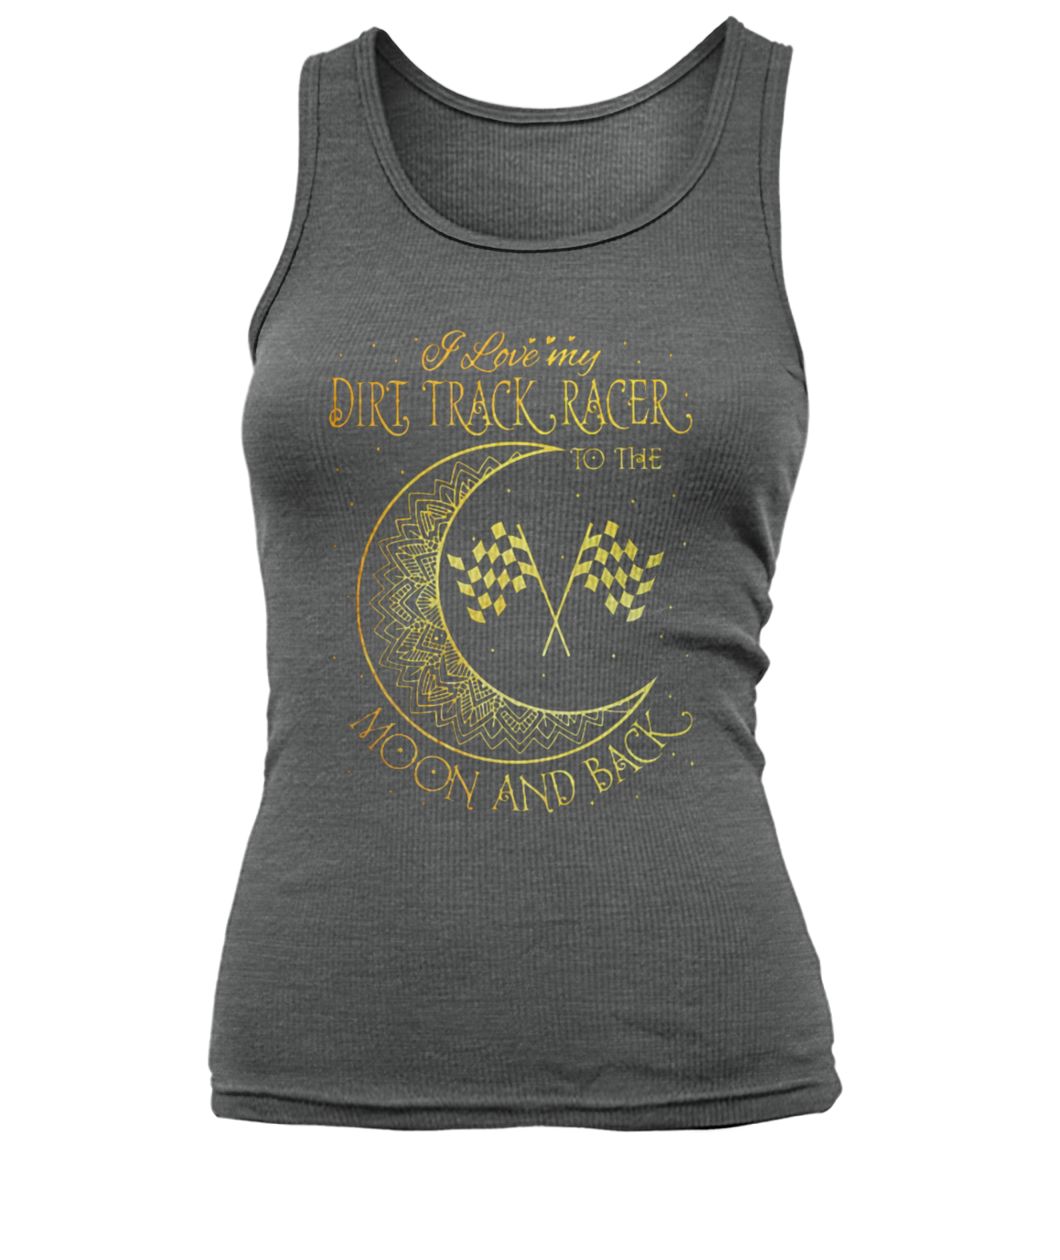 I love my dirt track racer to the moon and back women's tank top